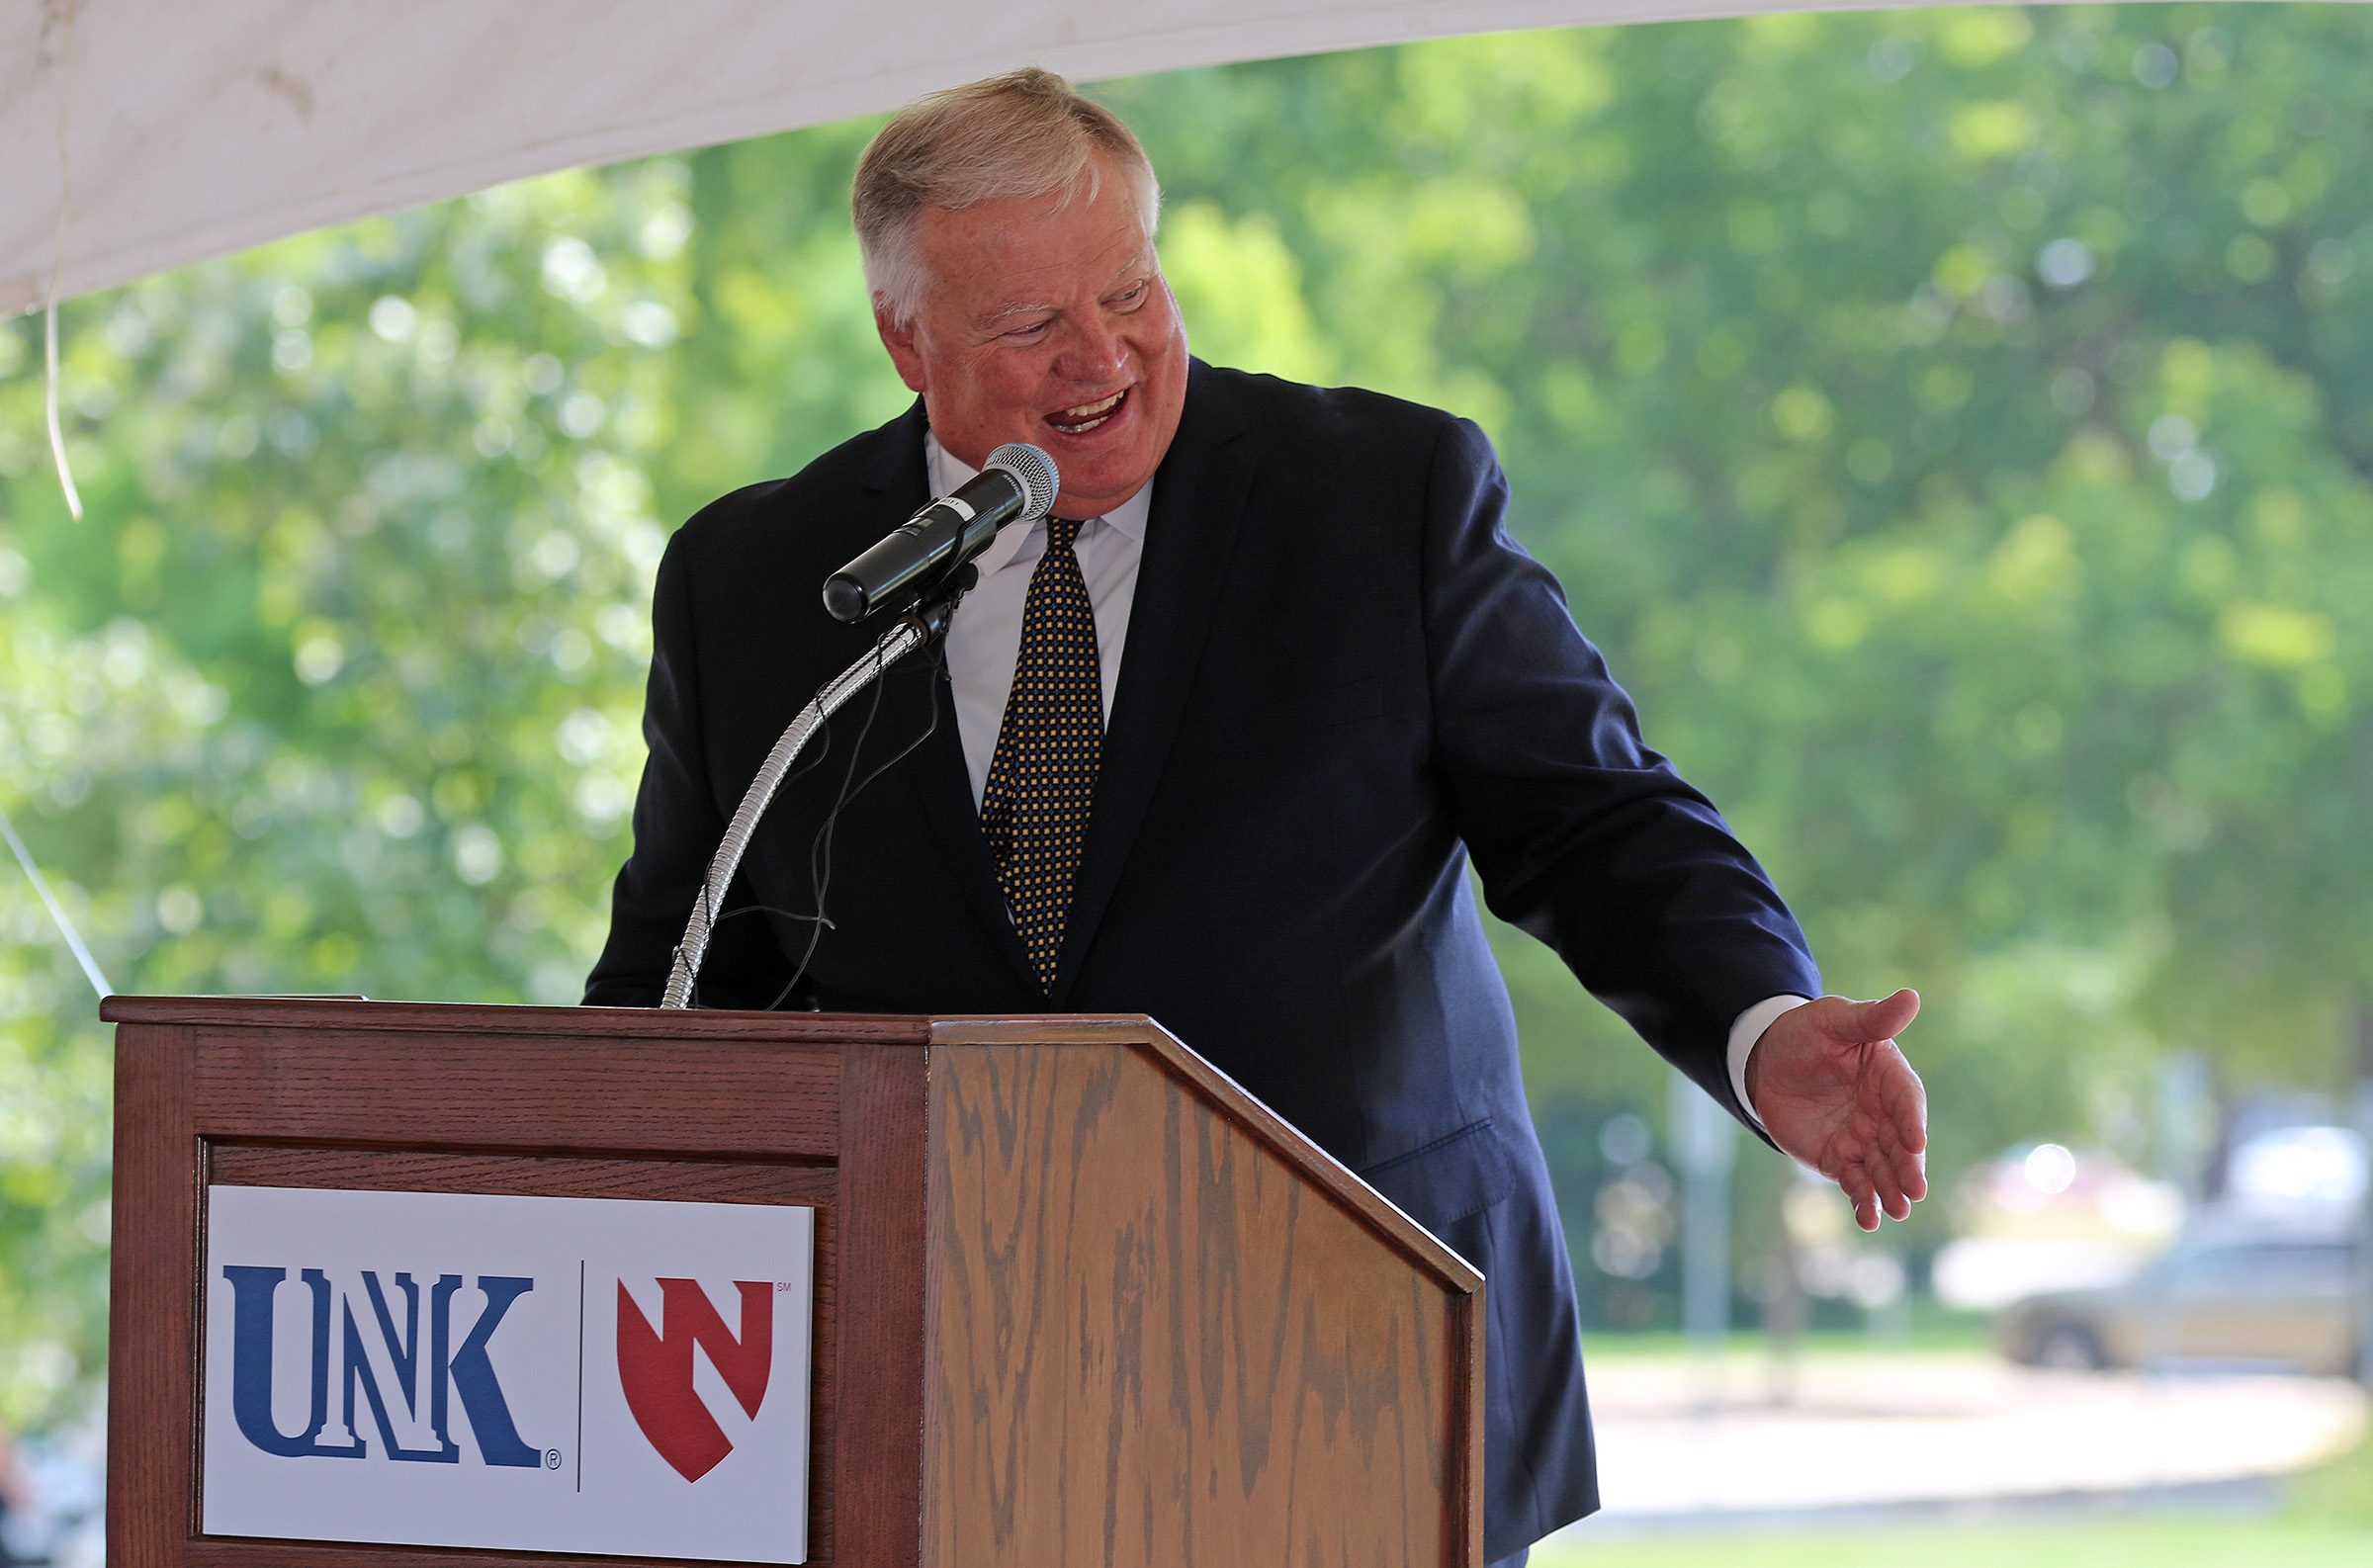 Speaking during last week’s groundbreaking ceremony for the new Rural Health Education Building in Kearney, UNK Chancellor Doug Kristensen called the project a historic collaboration that will “change Nebraska like no other.” (Photo by Todd Gottula, UNK Communications)